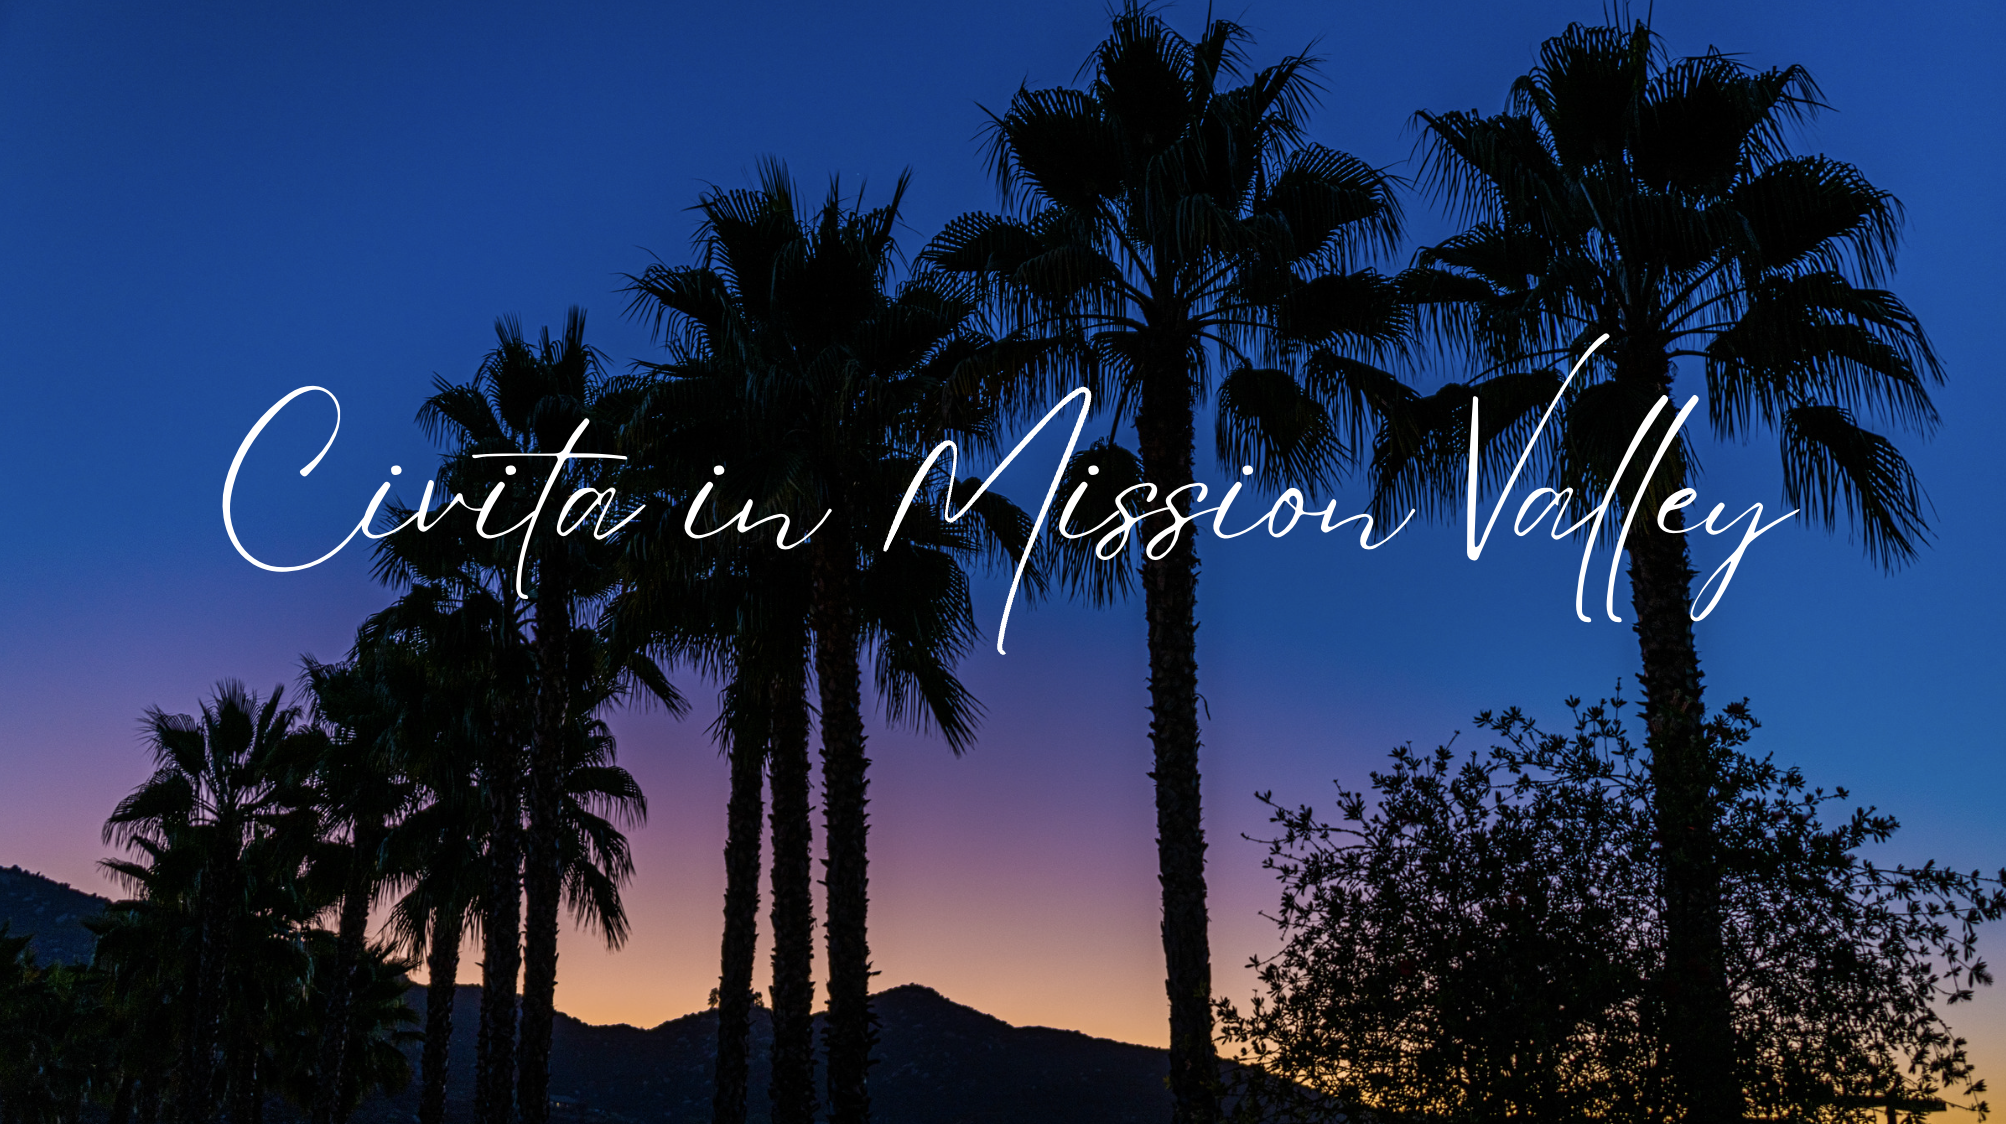 Living in Paradise: Exploring the Neighborhood of Civita in Mission Valley